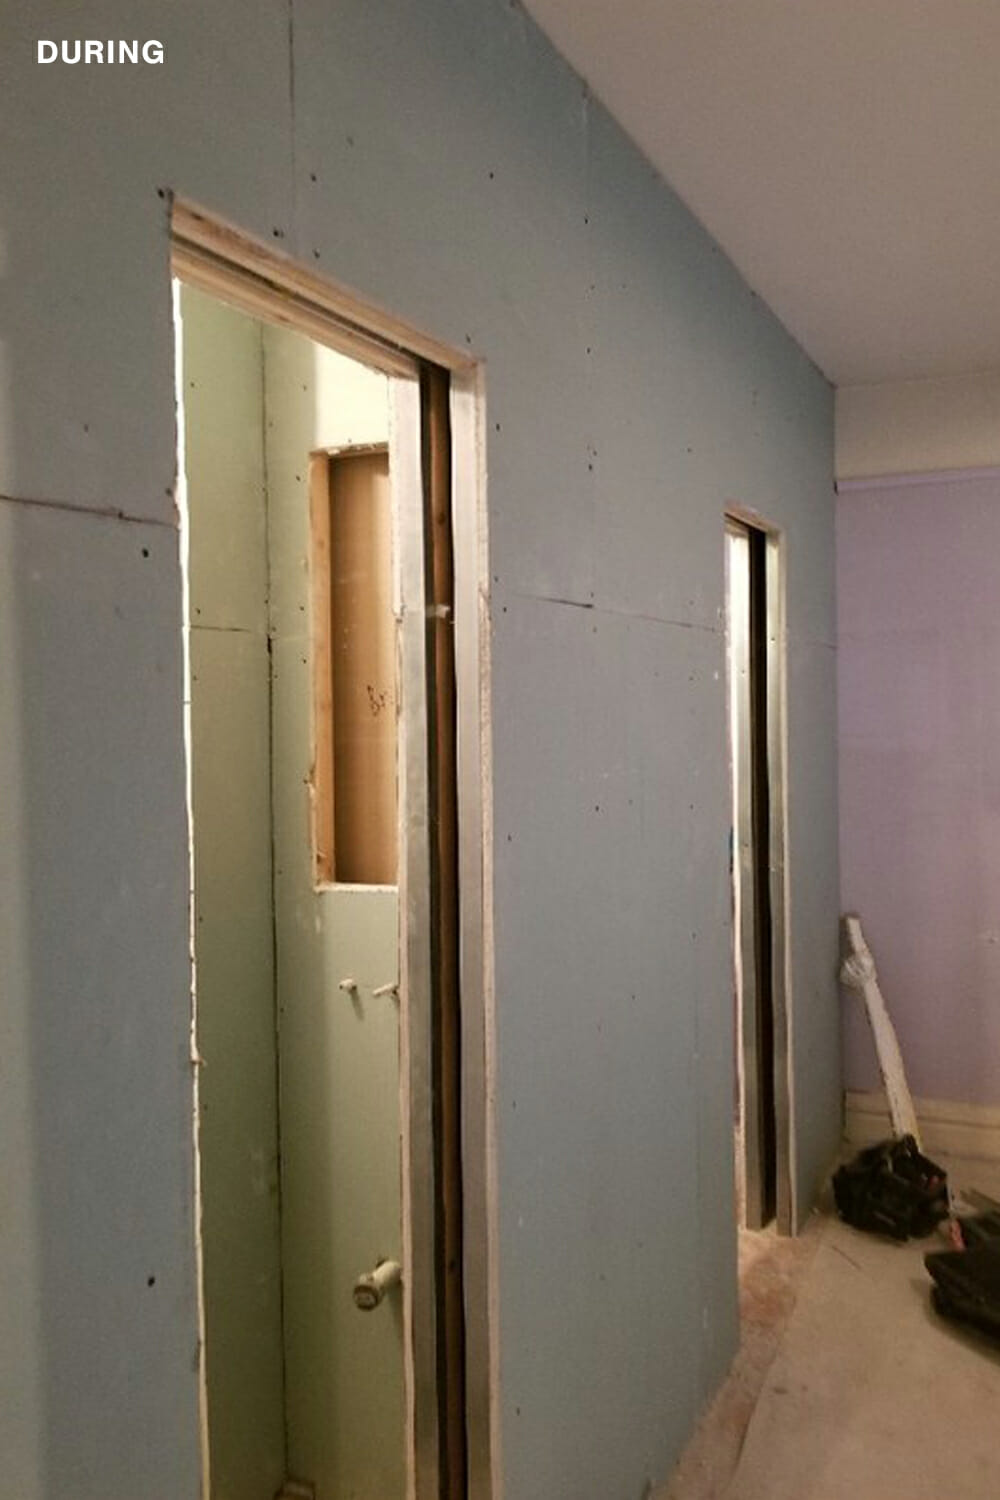 photo of drywalls cut and laid on two doorways during renovation